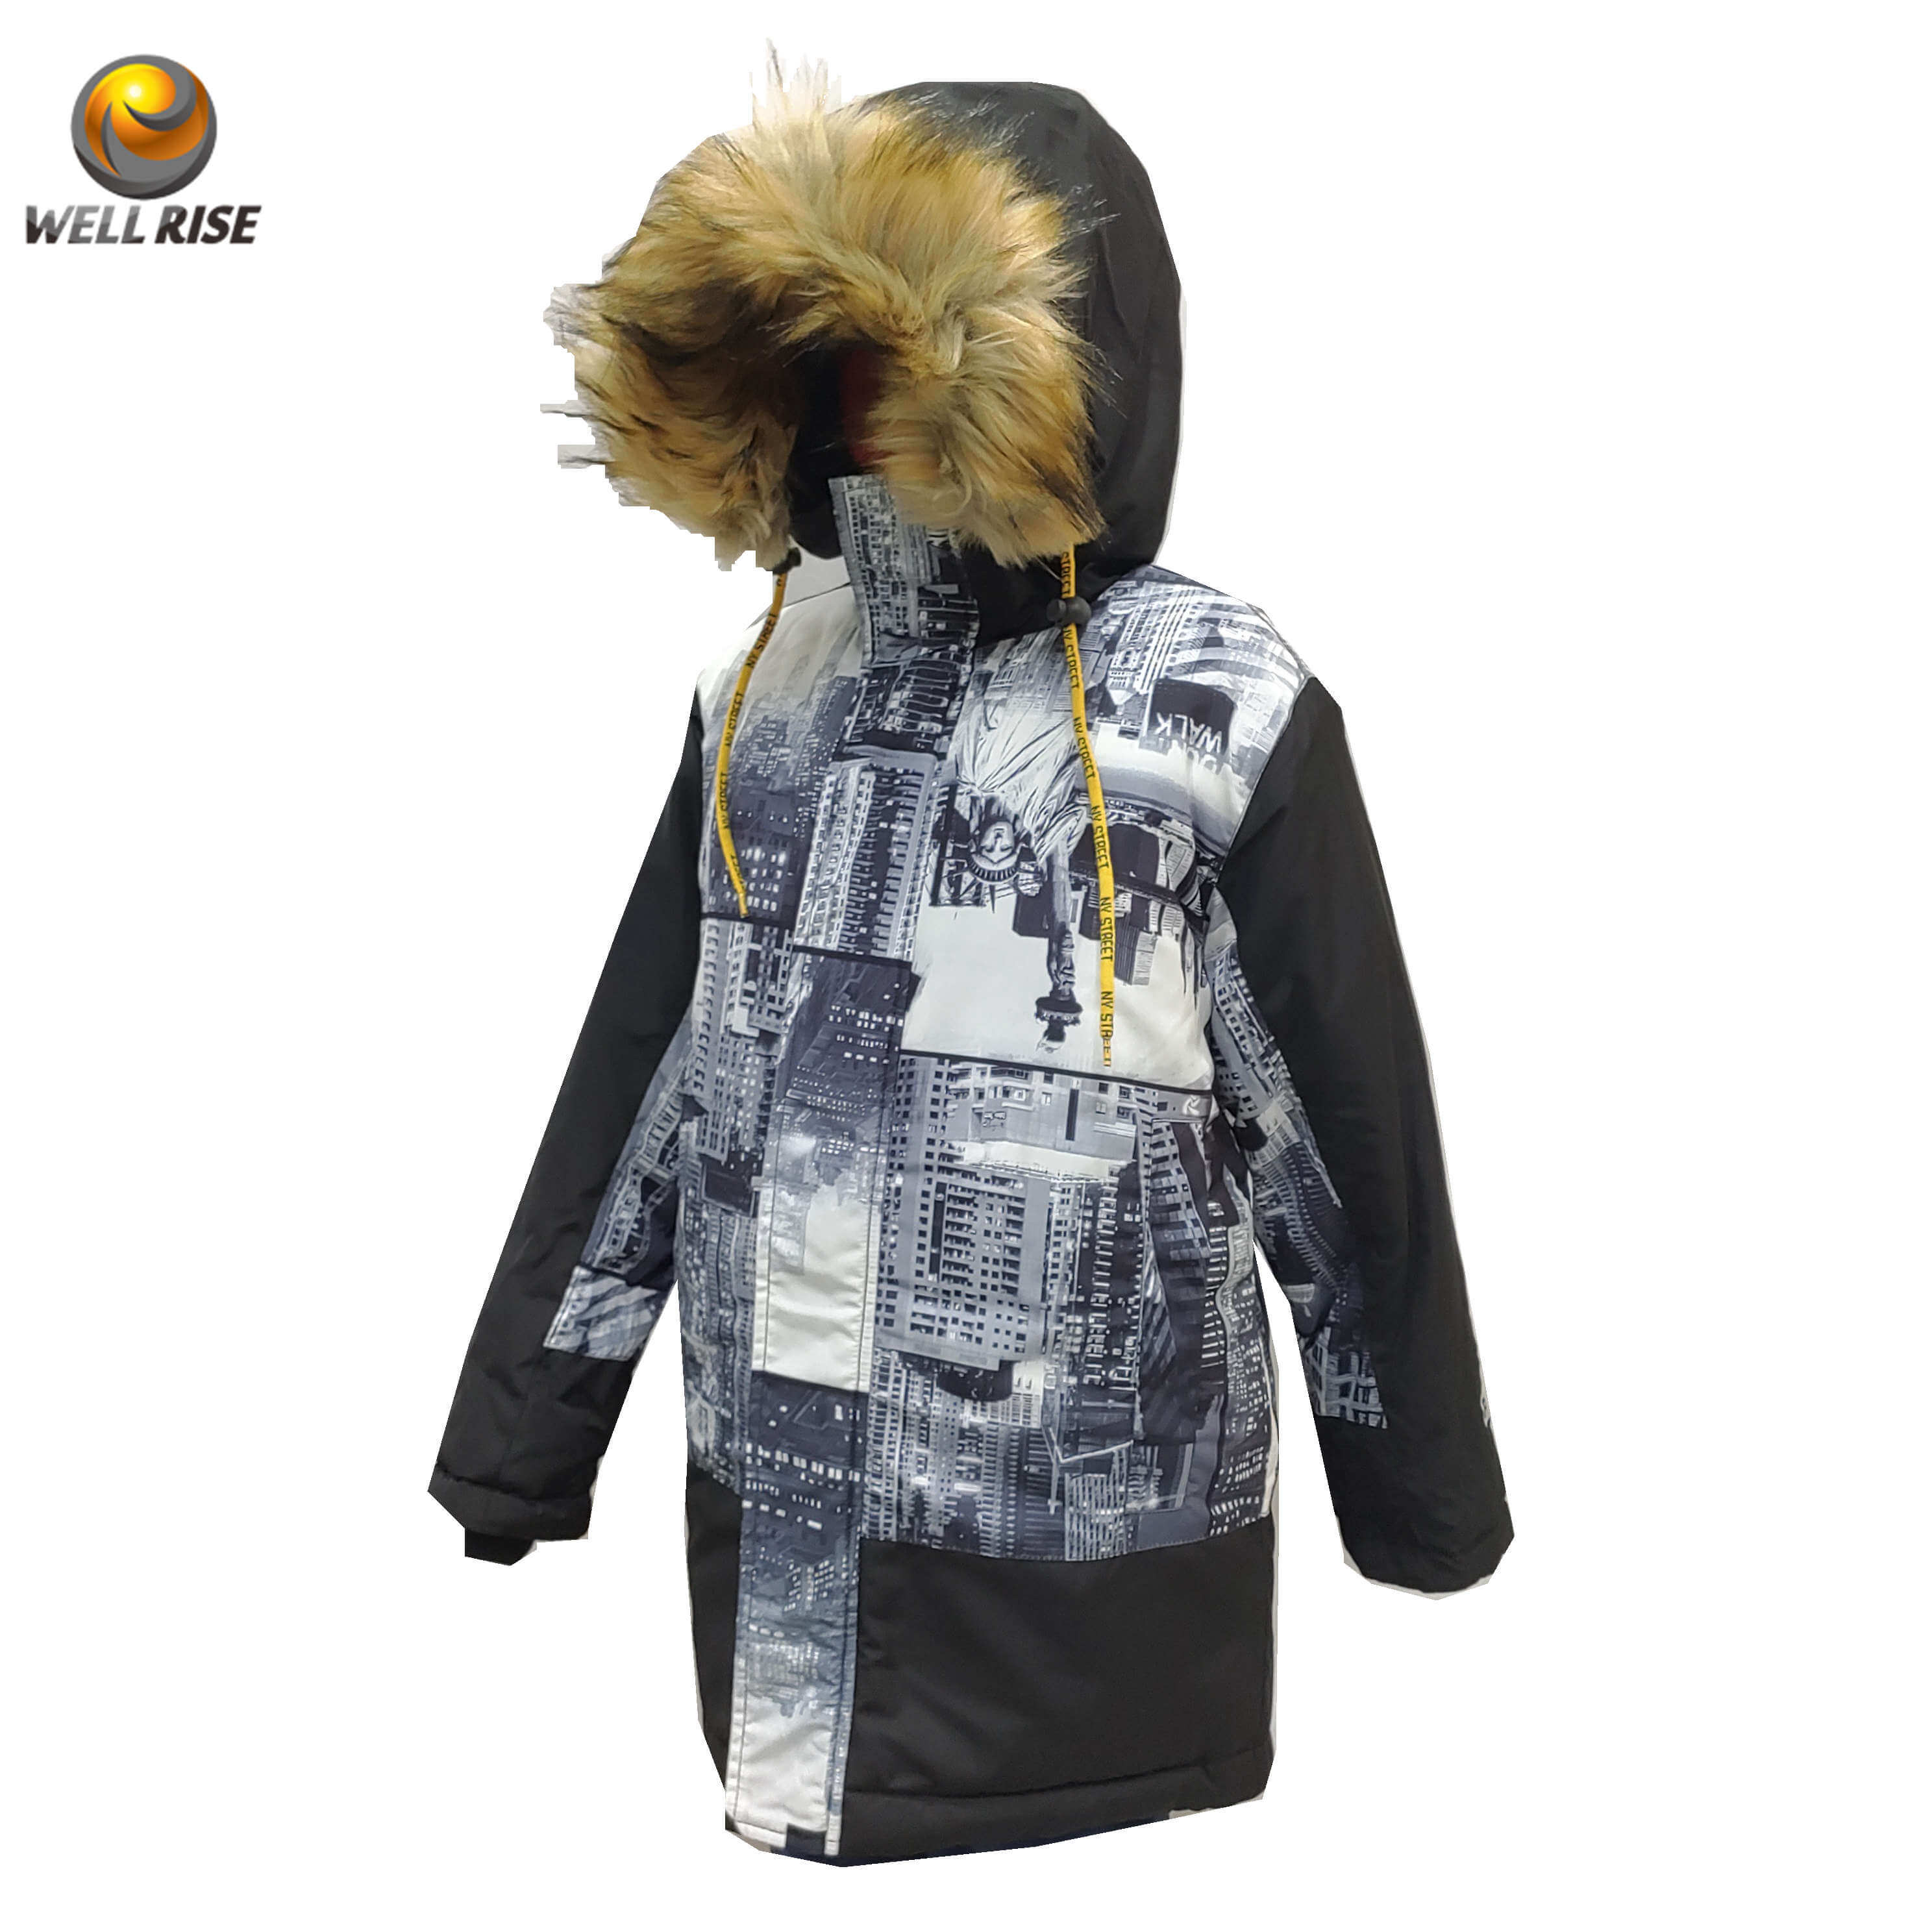 Boy's Waterproof Windproof Ski Jacket with overall printing